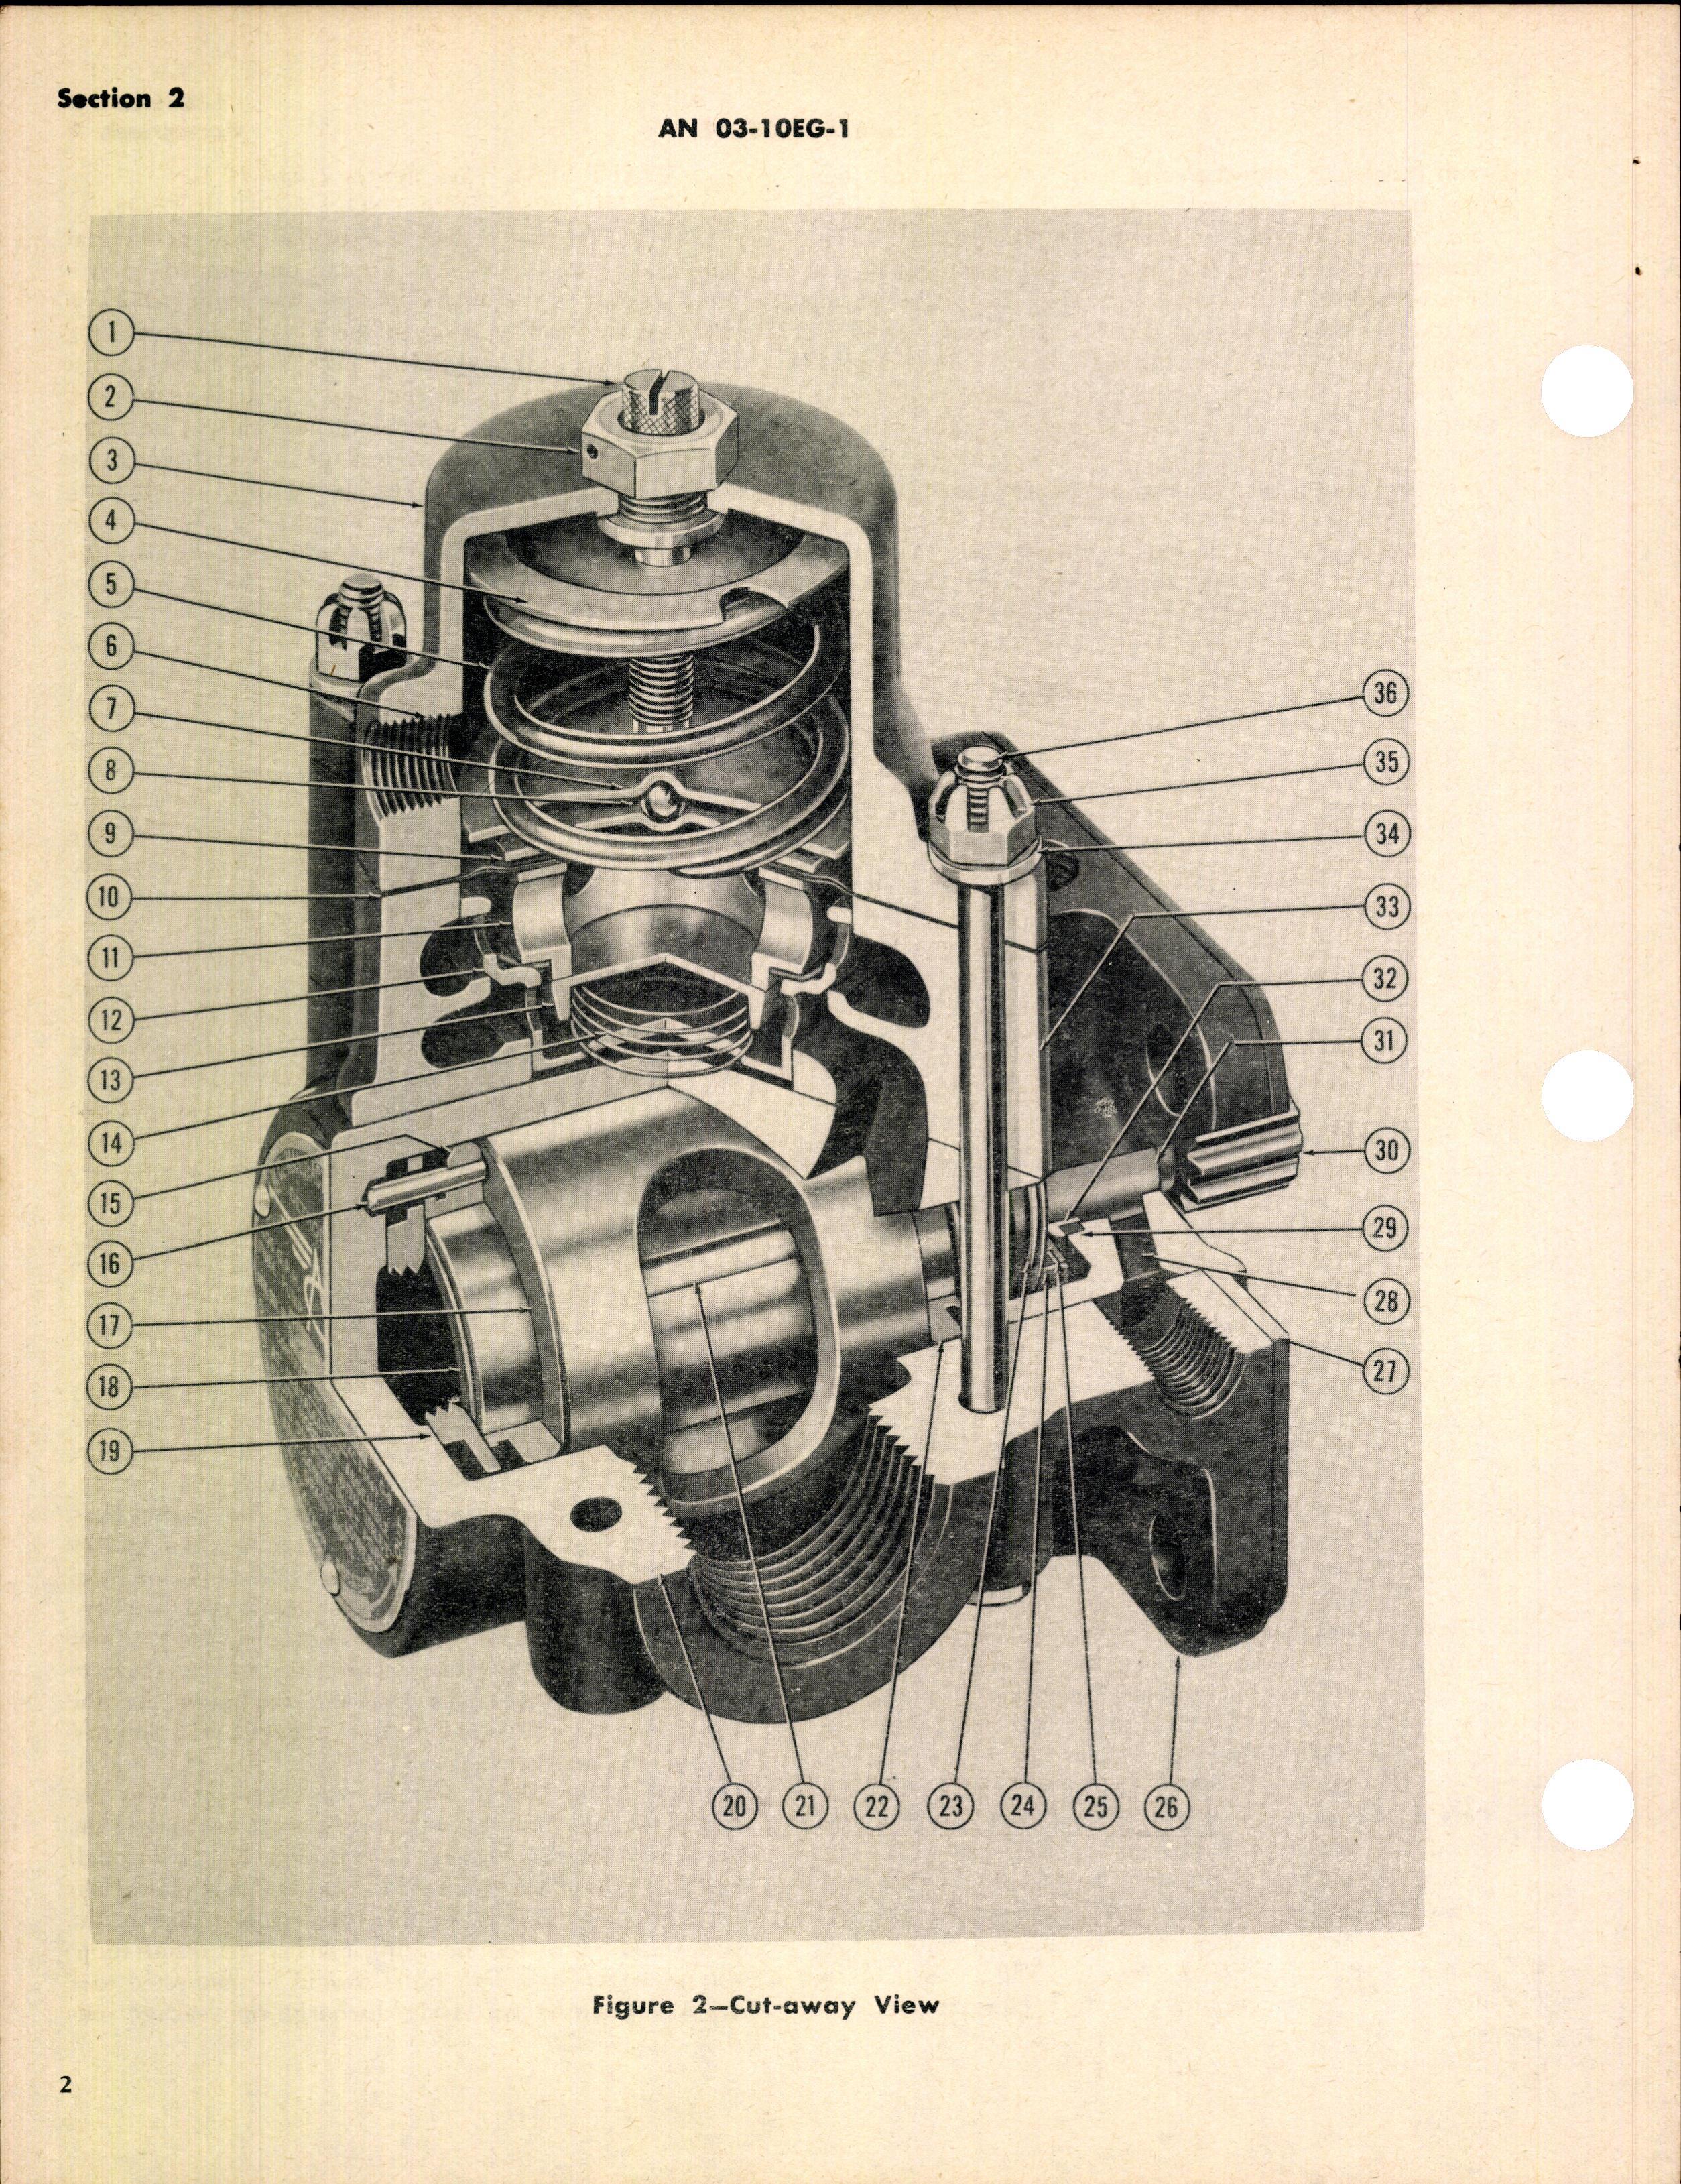 Sample page 6 from AirCorps Library document: Operation, Service, & Overhaul Instructions with Parts Catalog for Engine-Driven Fuel Pump Type AN4101 (G-9)